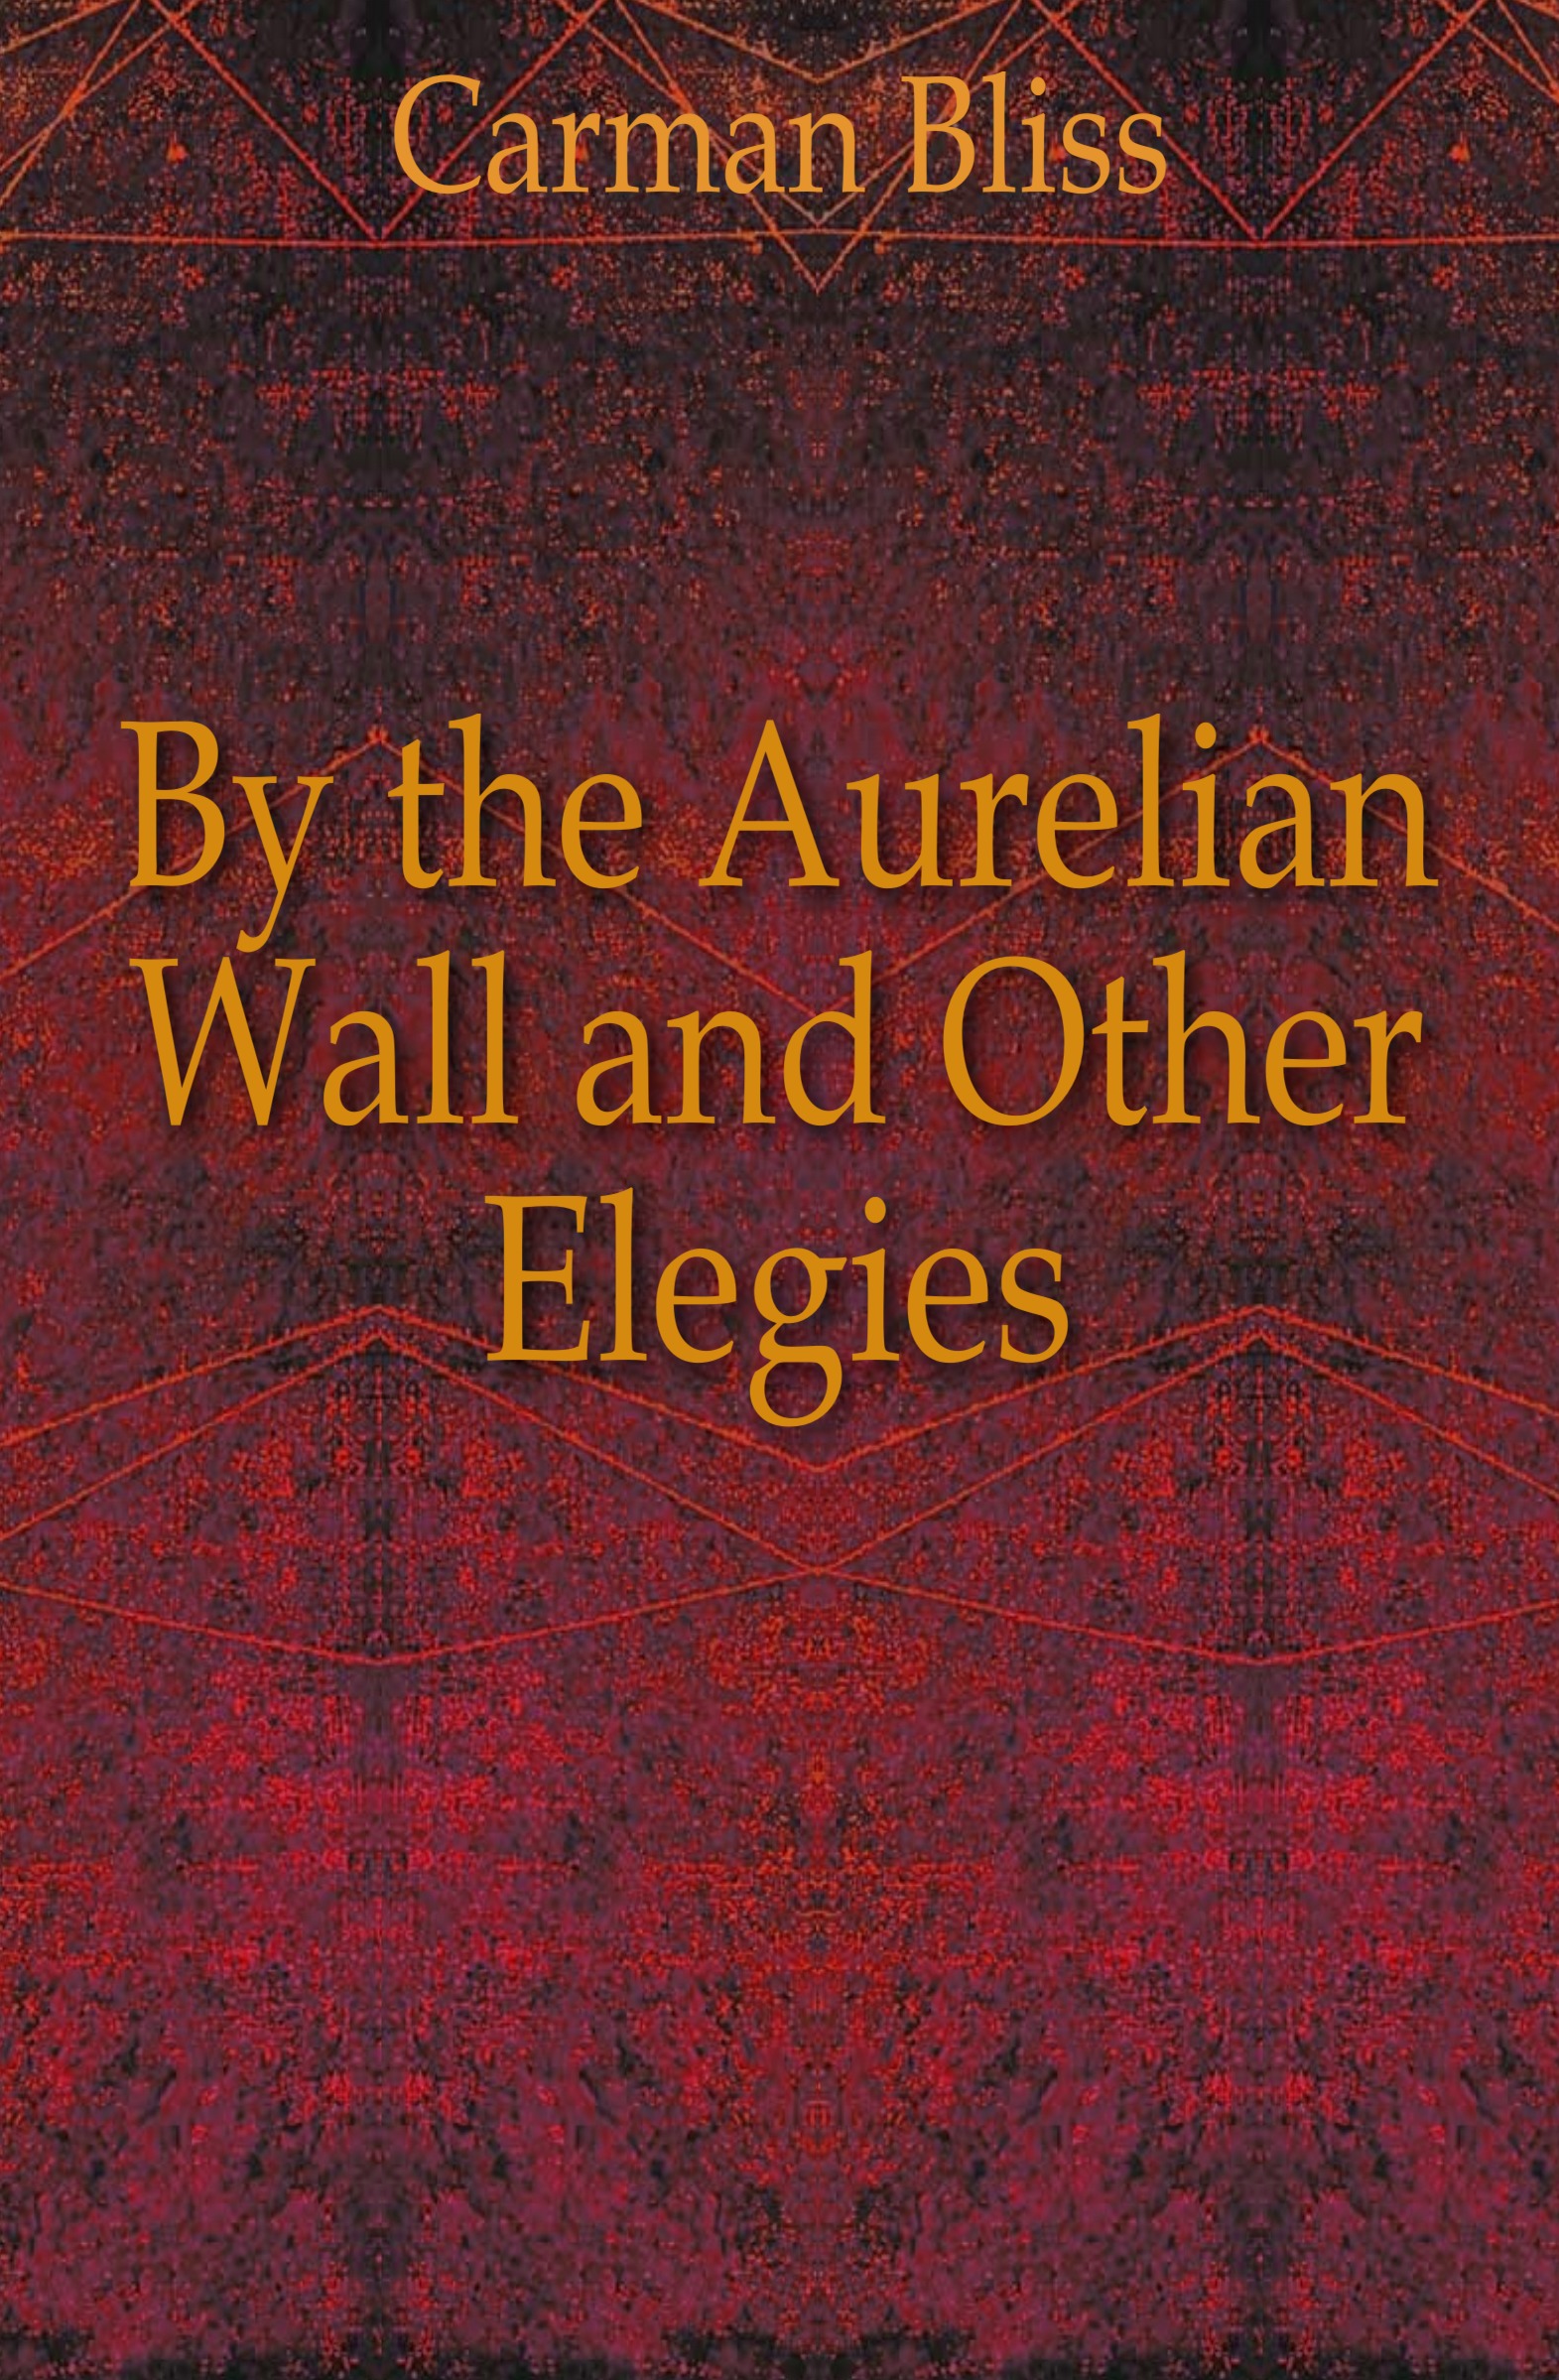 Carman Bliss By the Aurelian Wall and Other Elegies